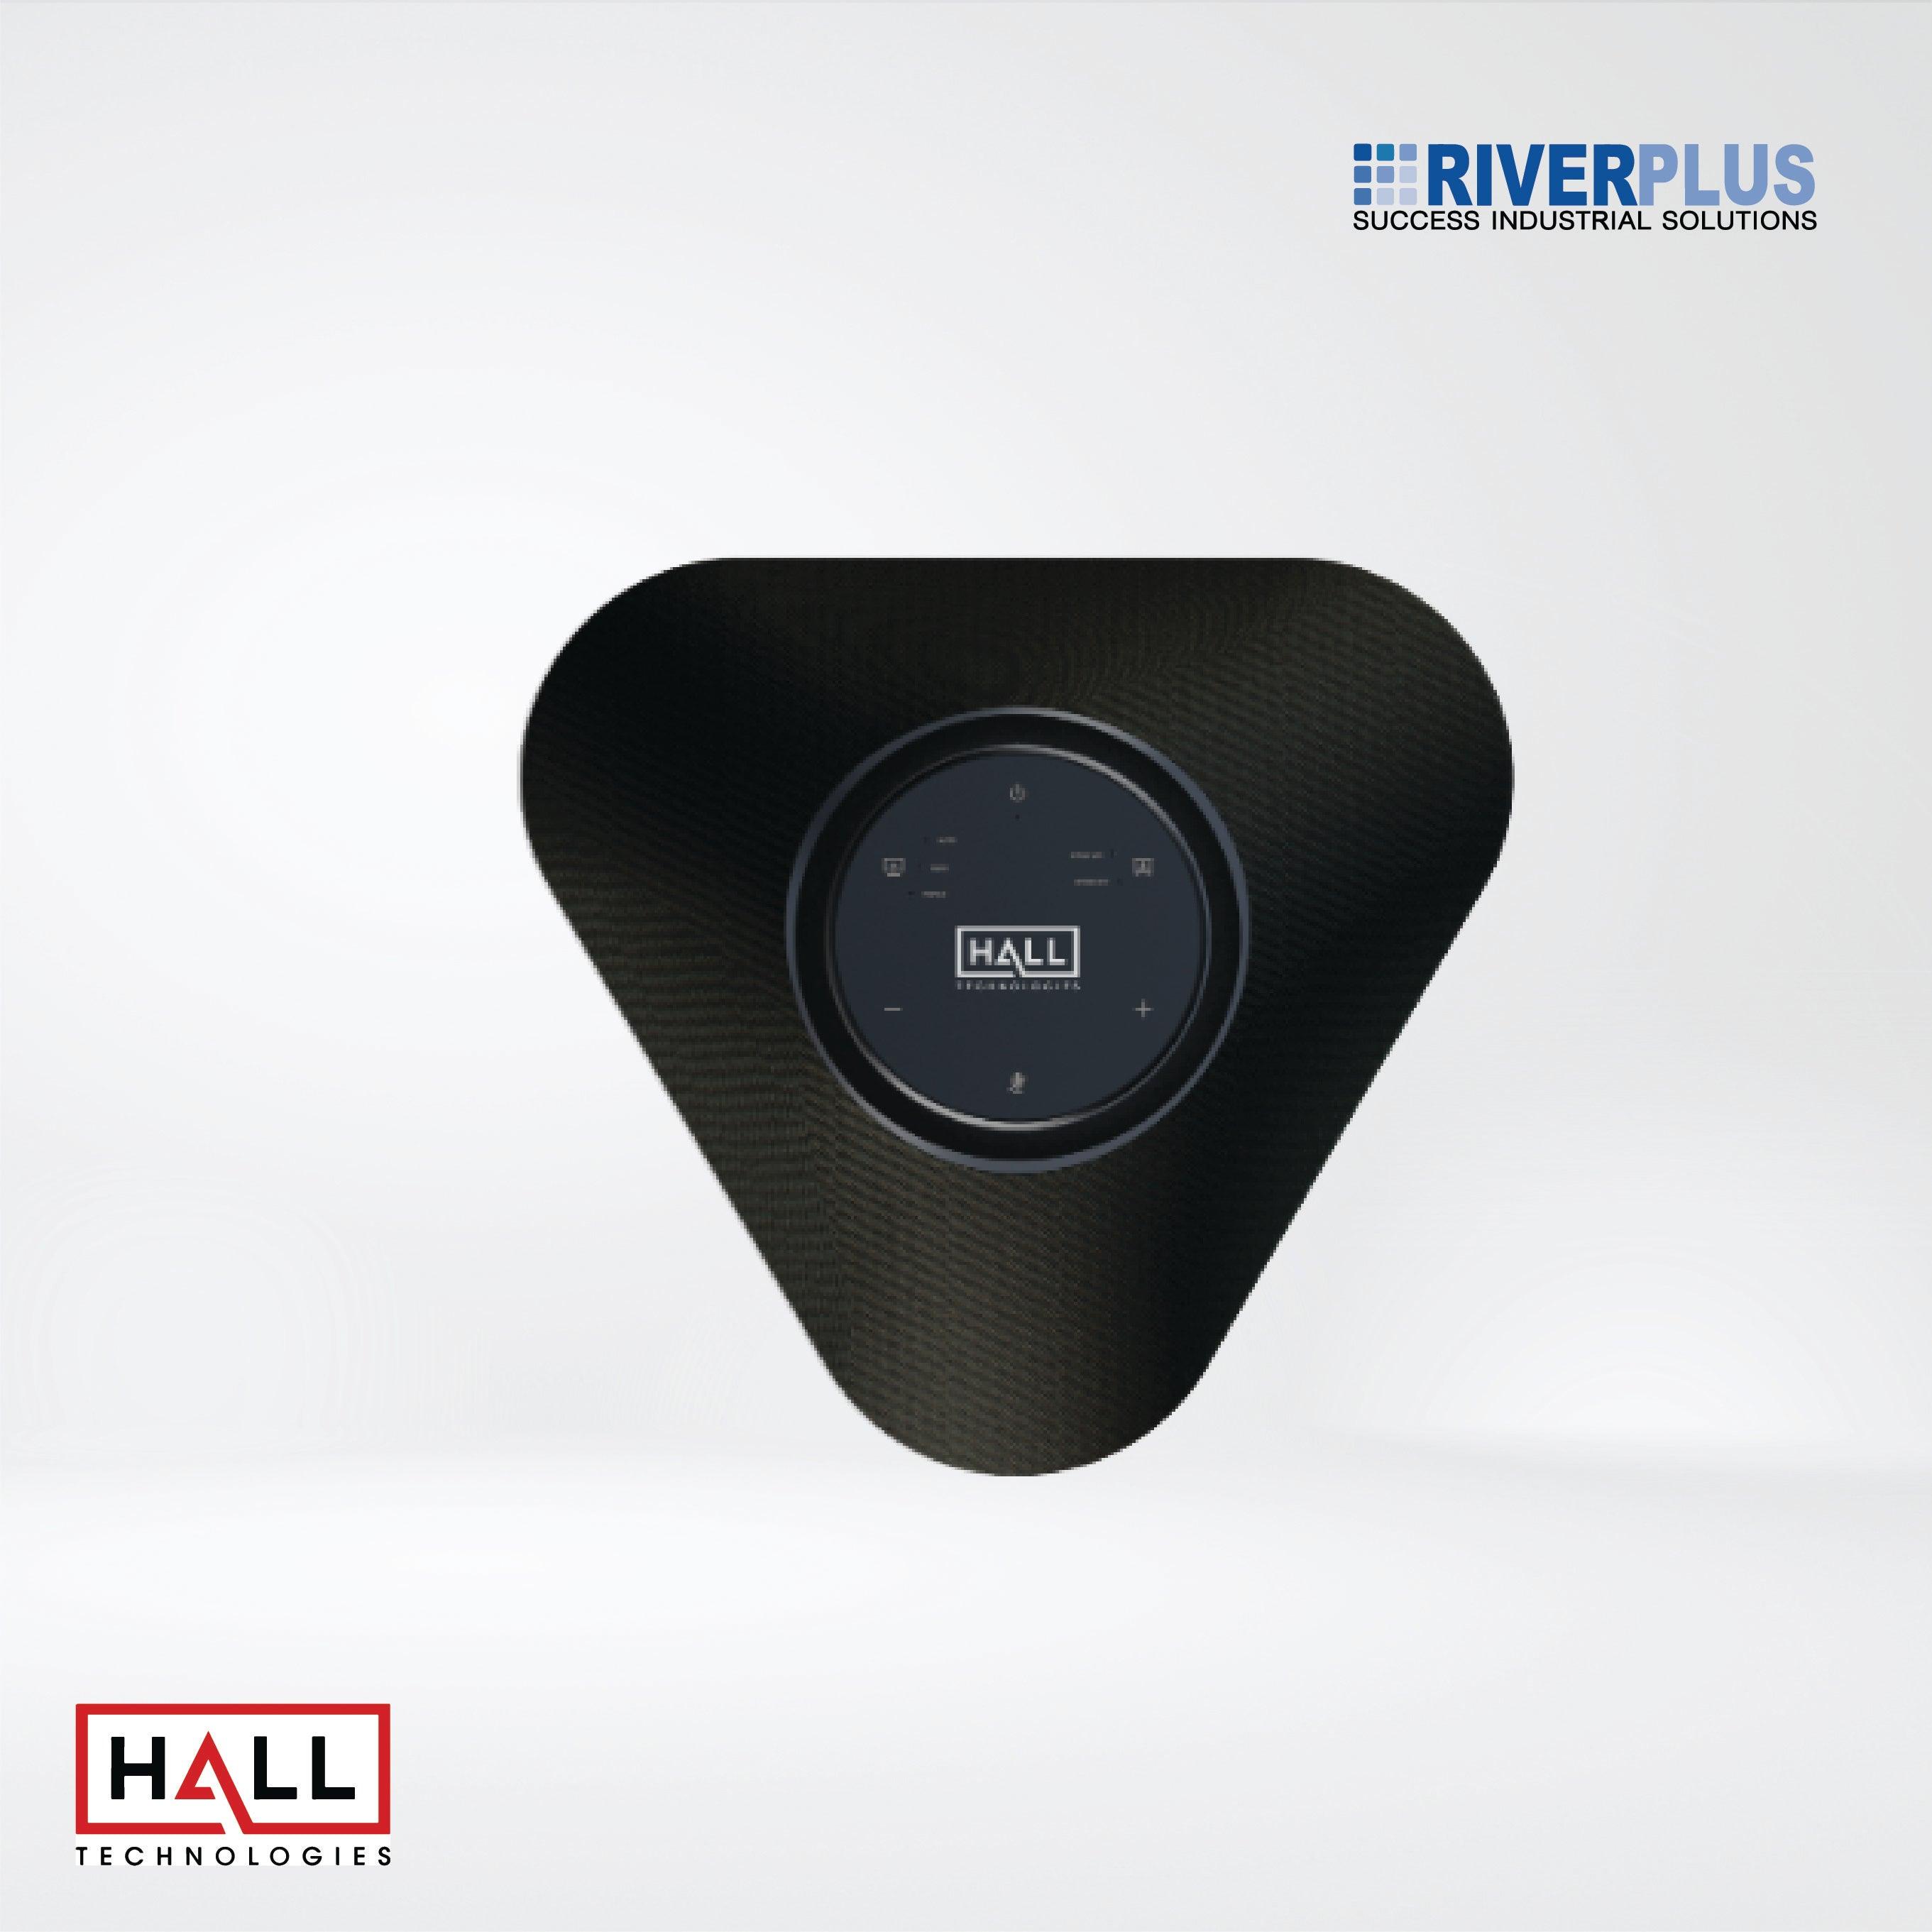 HT-ODYSSEY Conference Speakerphone with Video Presentation and BYOD - Riverplus